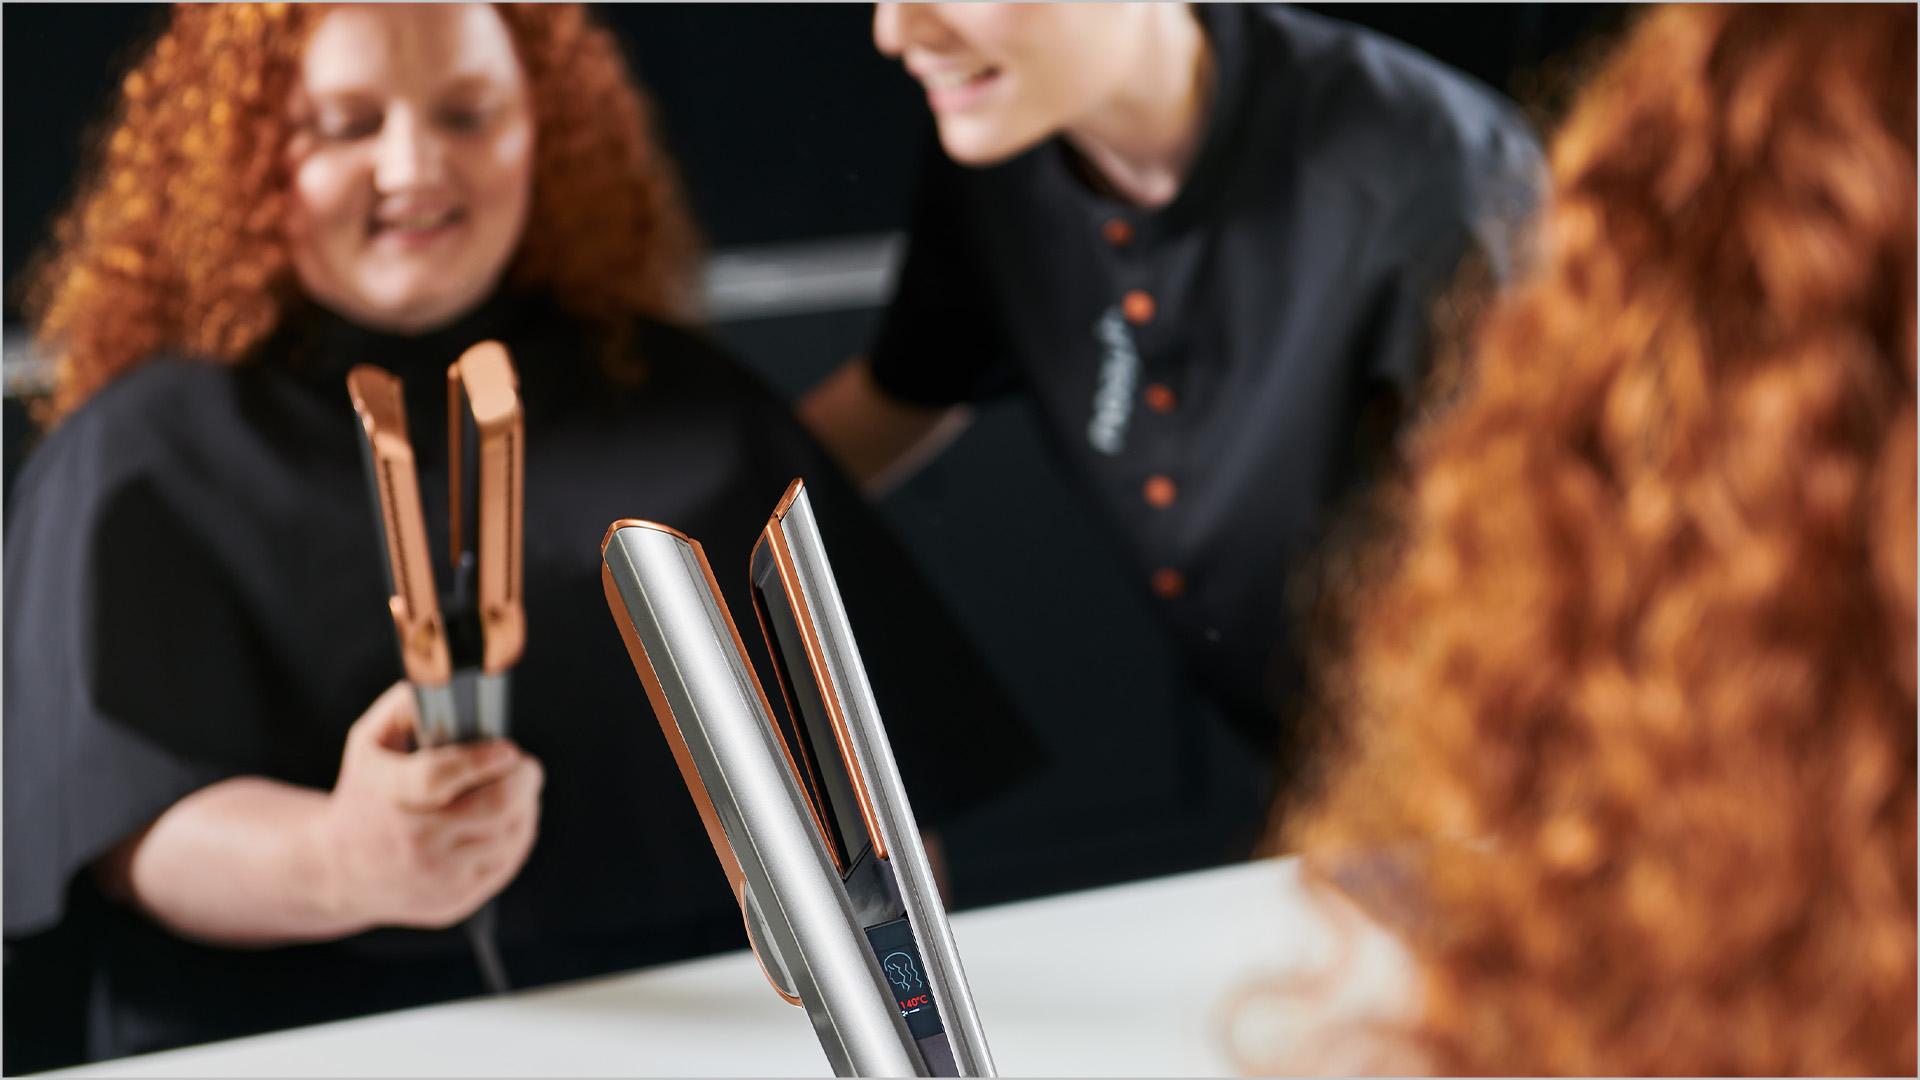 A customer in the Dyson Demo Store tries out the Dyson Airstrait straightener, helped by a Dyson Expert.